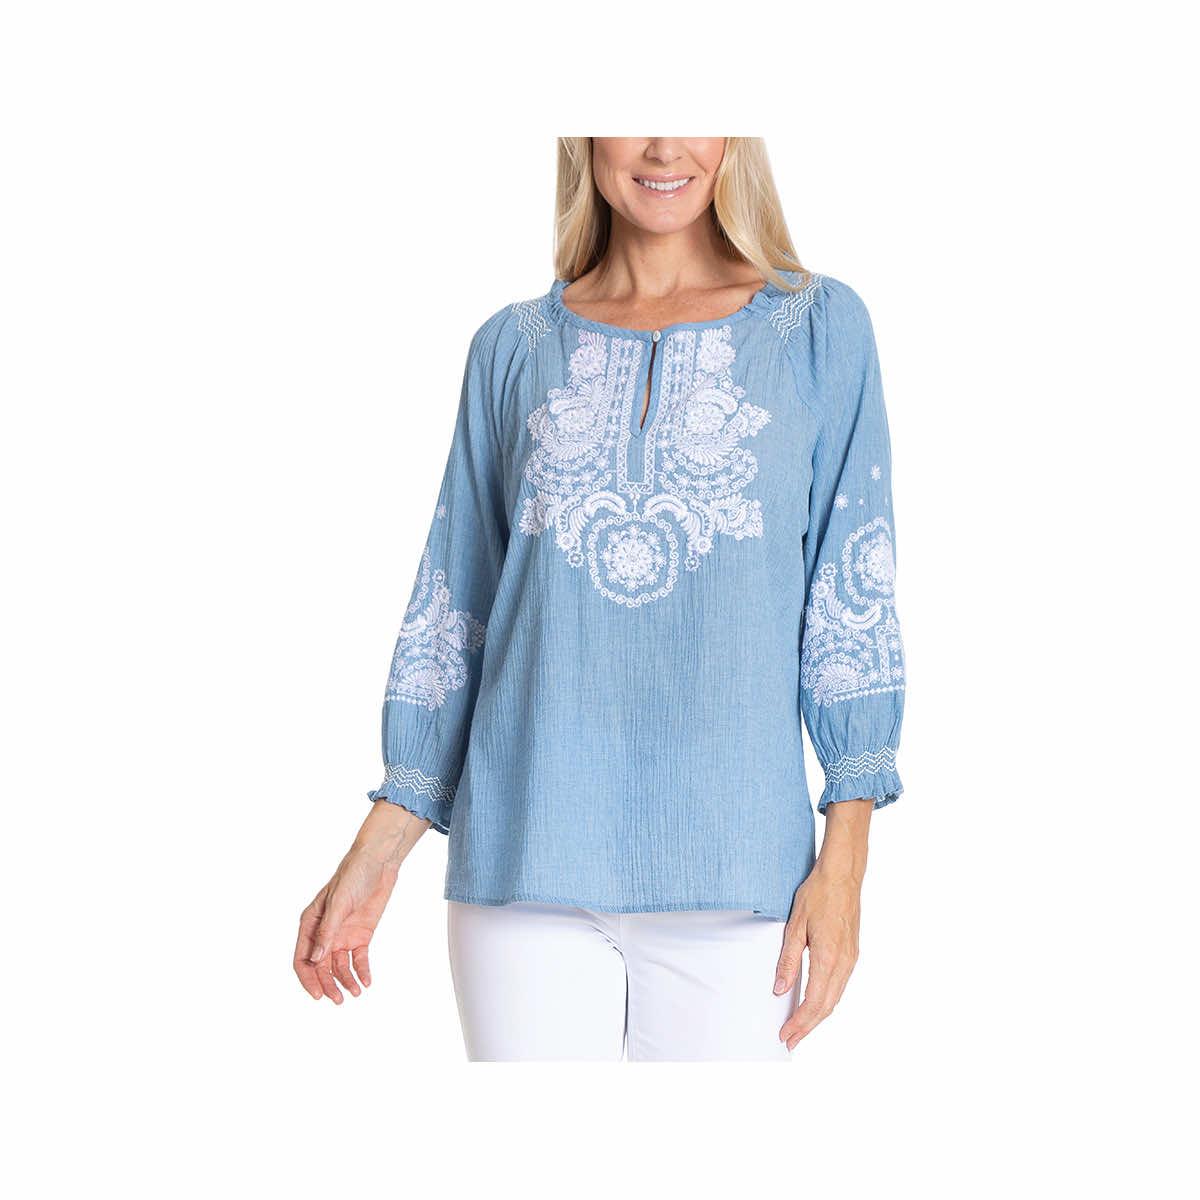  Women's Embroidered Chambray Top